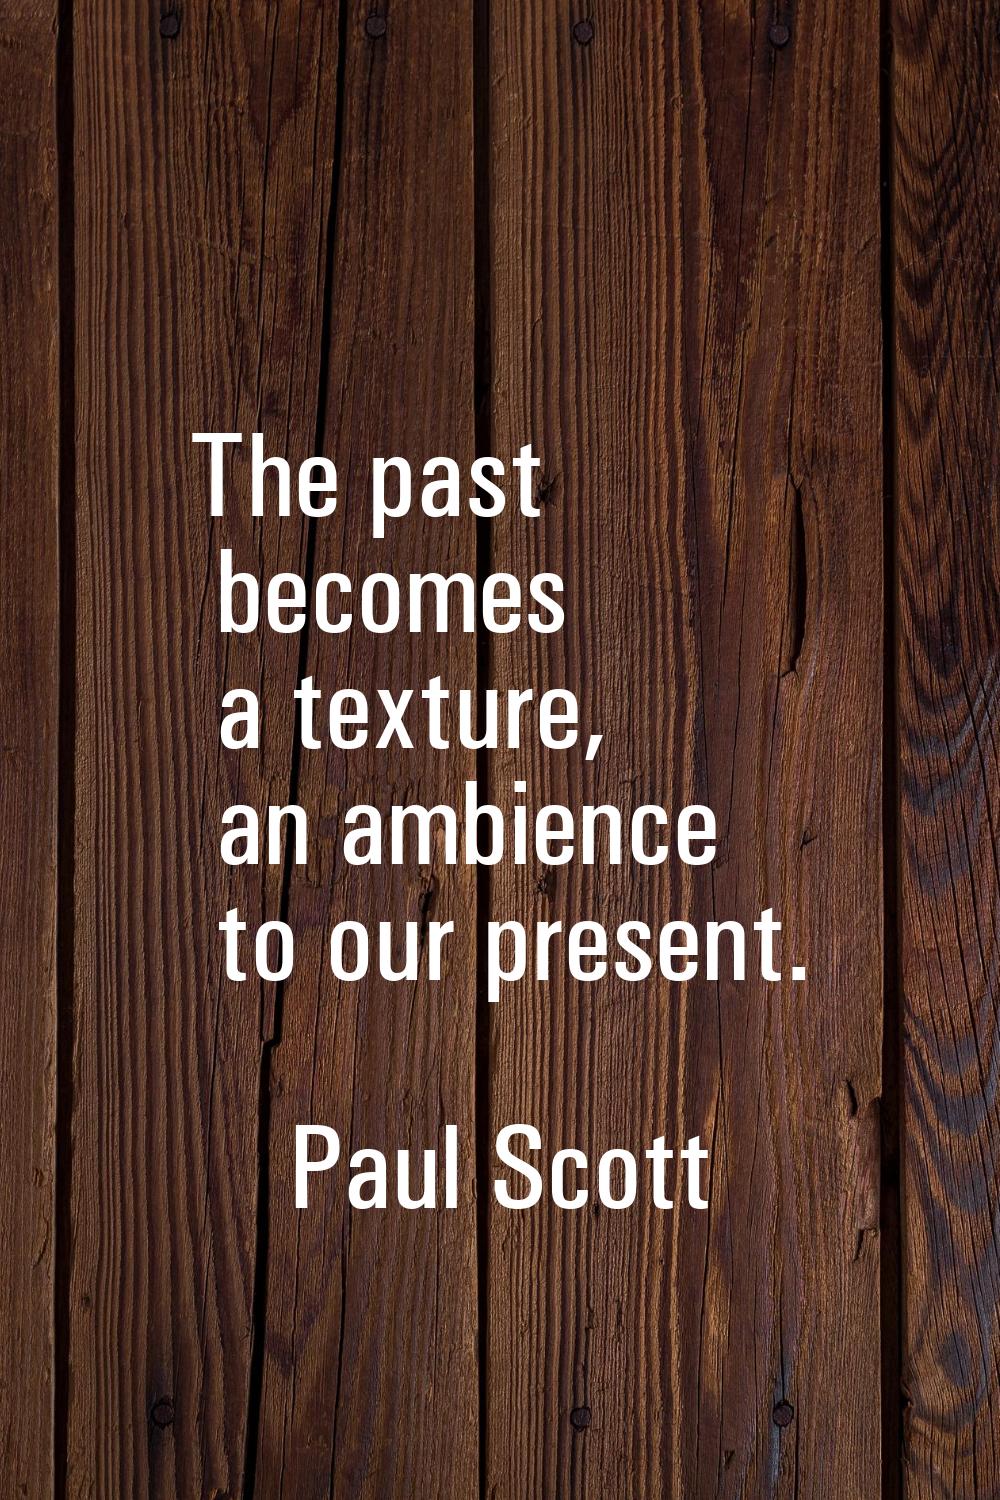 The past becomes a texture, an ambience to our present.